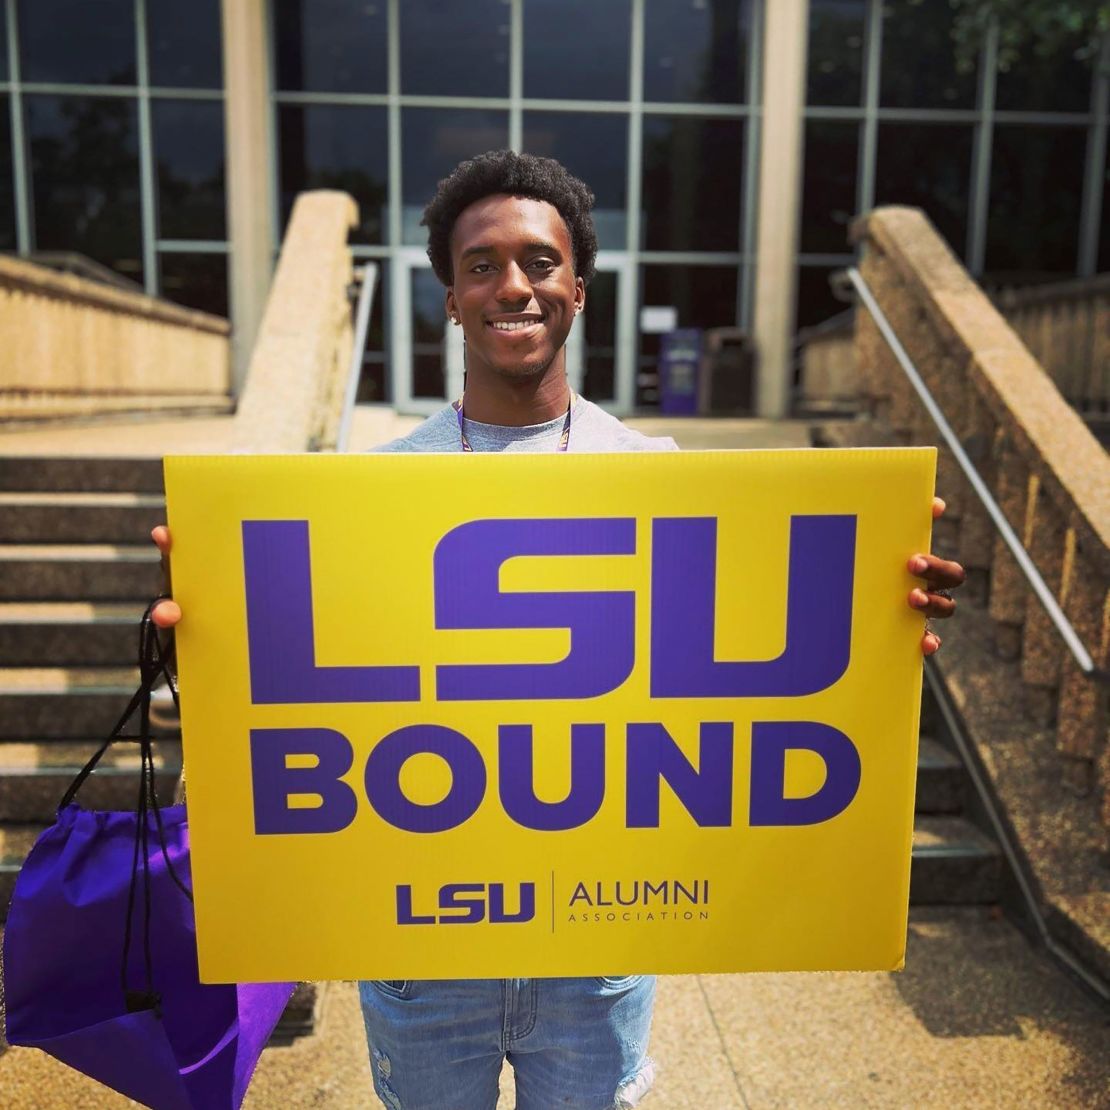 Marsiah Collins deferred enrollment to LSU and spent more time with his family, his father said. The teen was killed Satruday night along with his best friend, Philstavious Dowdell.